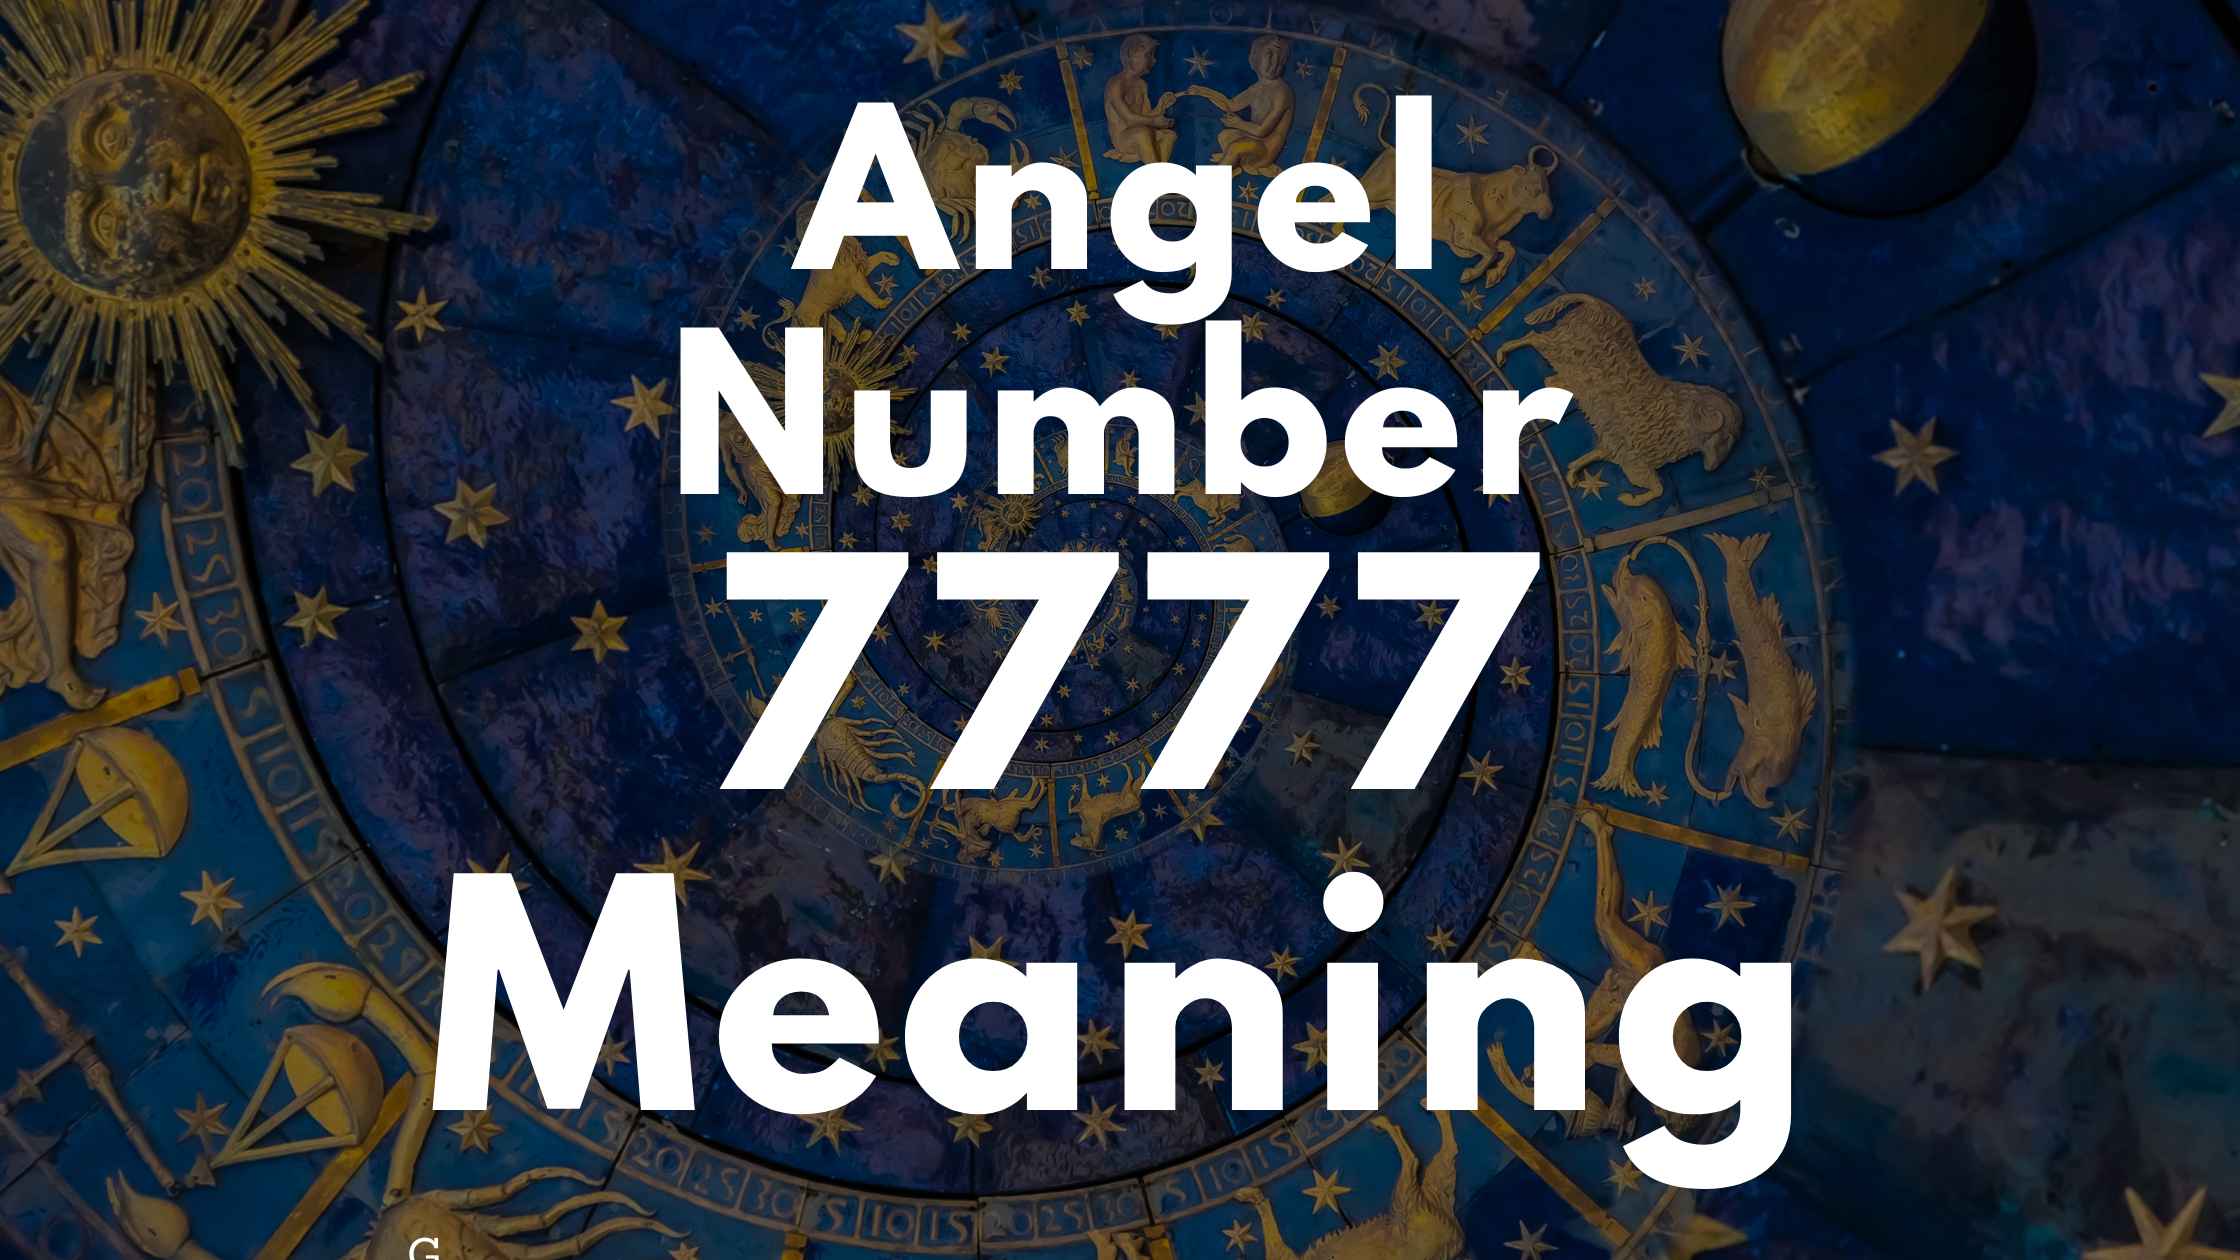 Angel Number 7777 Spiritual Meaning, Symbolism, and Significance (1)